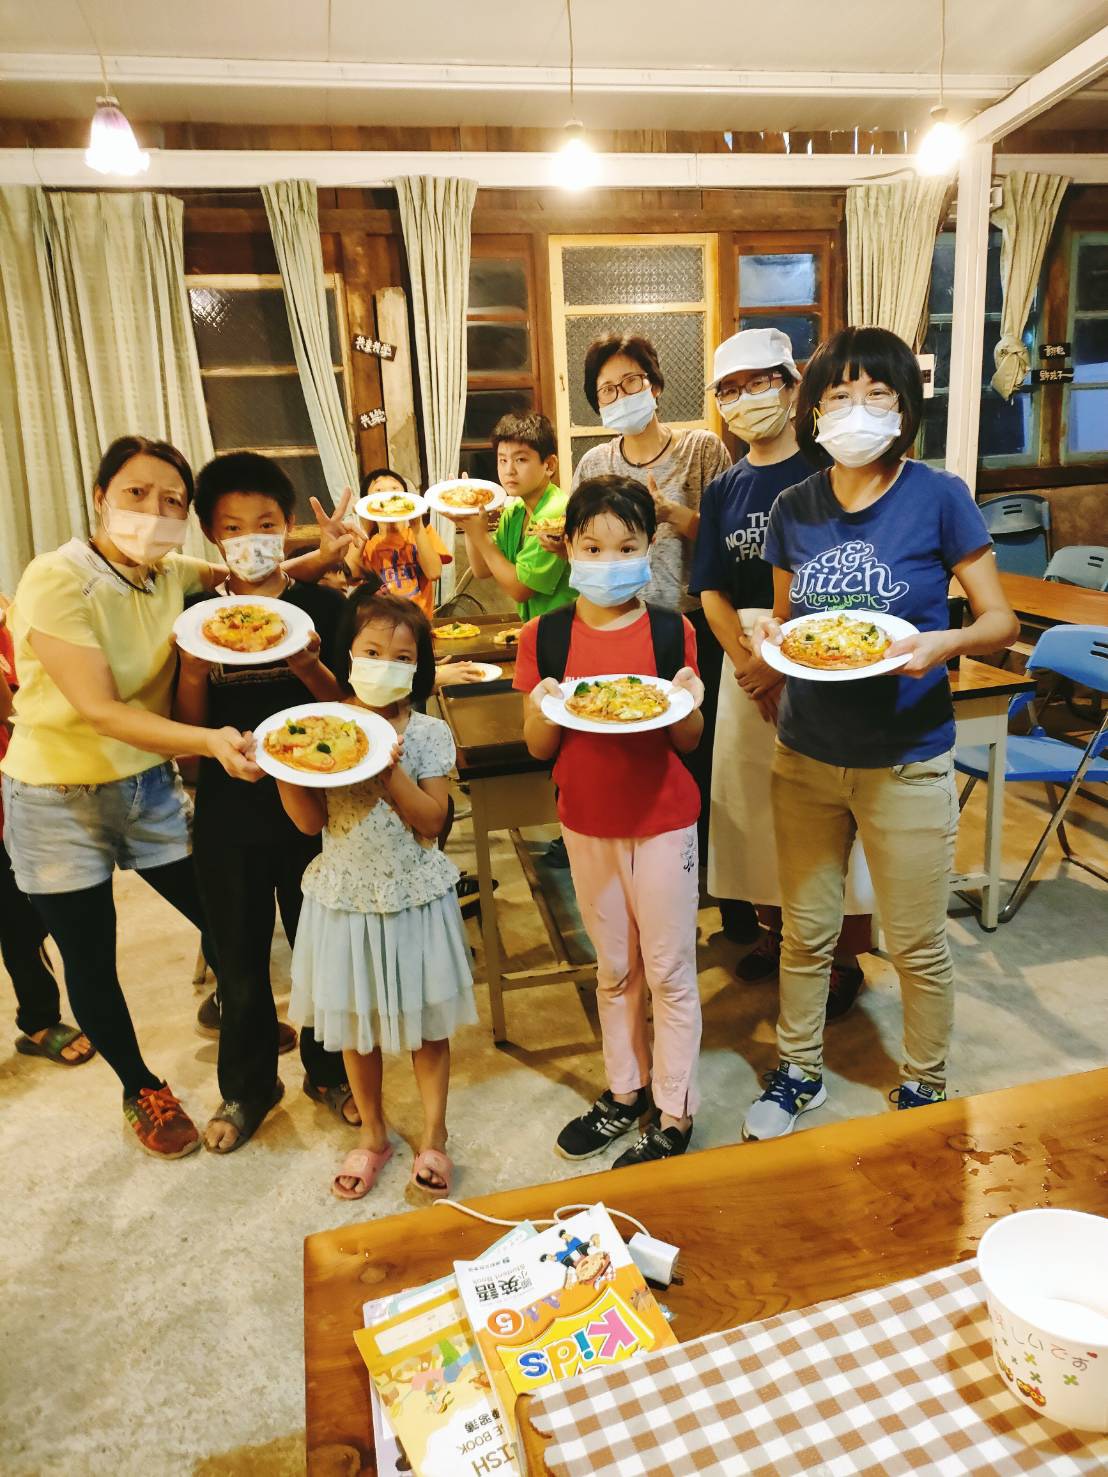 Ma Min cooks together with the new immigrant mothers and children (Photo∕Provided by Ma Min)